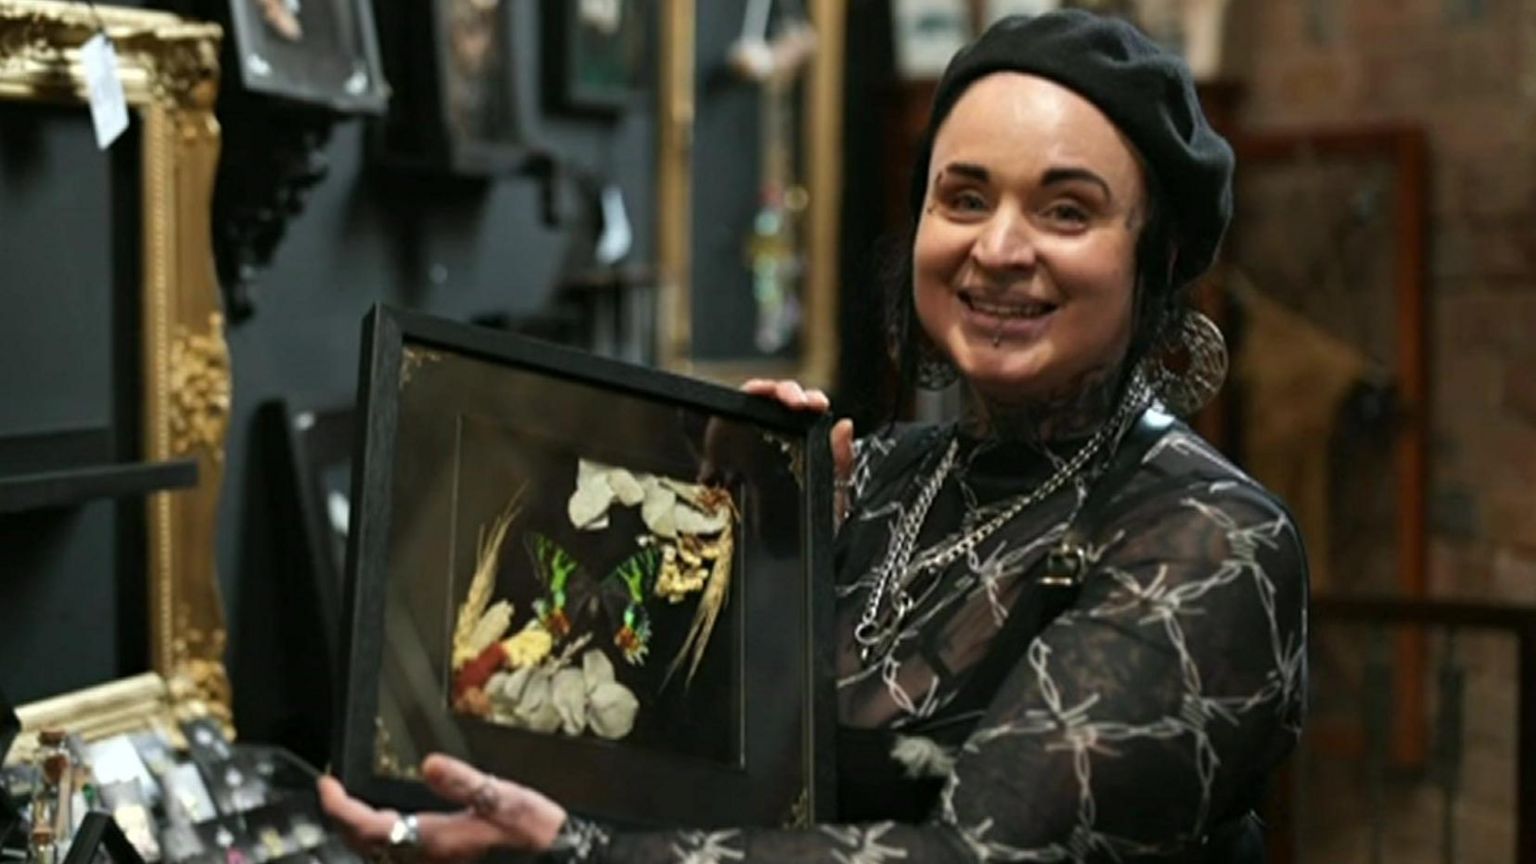 Carrie-Anne Moore, who runs alternative store Broken Bonds in Digbeth, smiling and holding up a framed picture of a butterfly